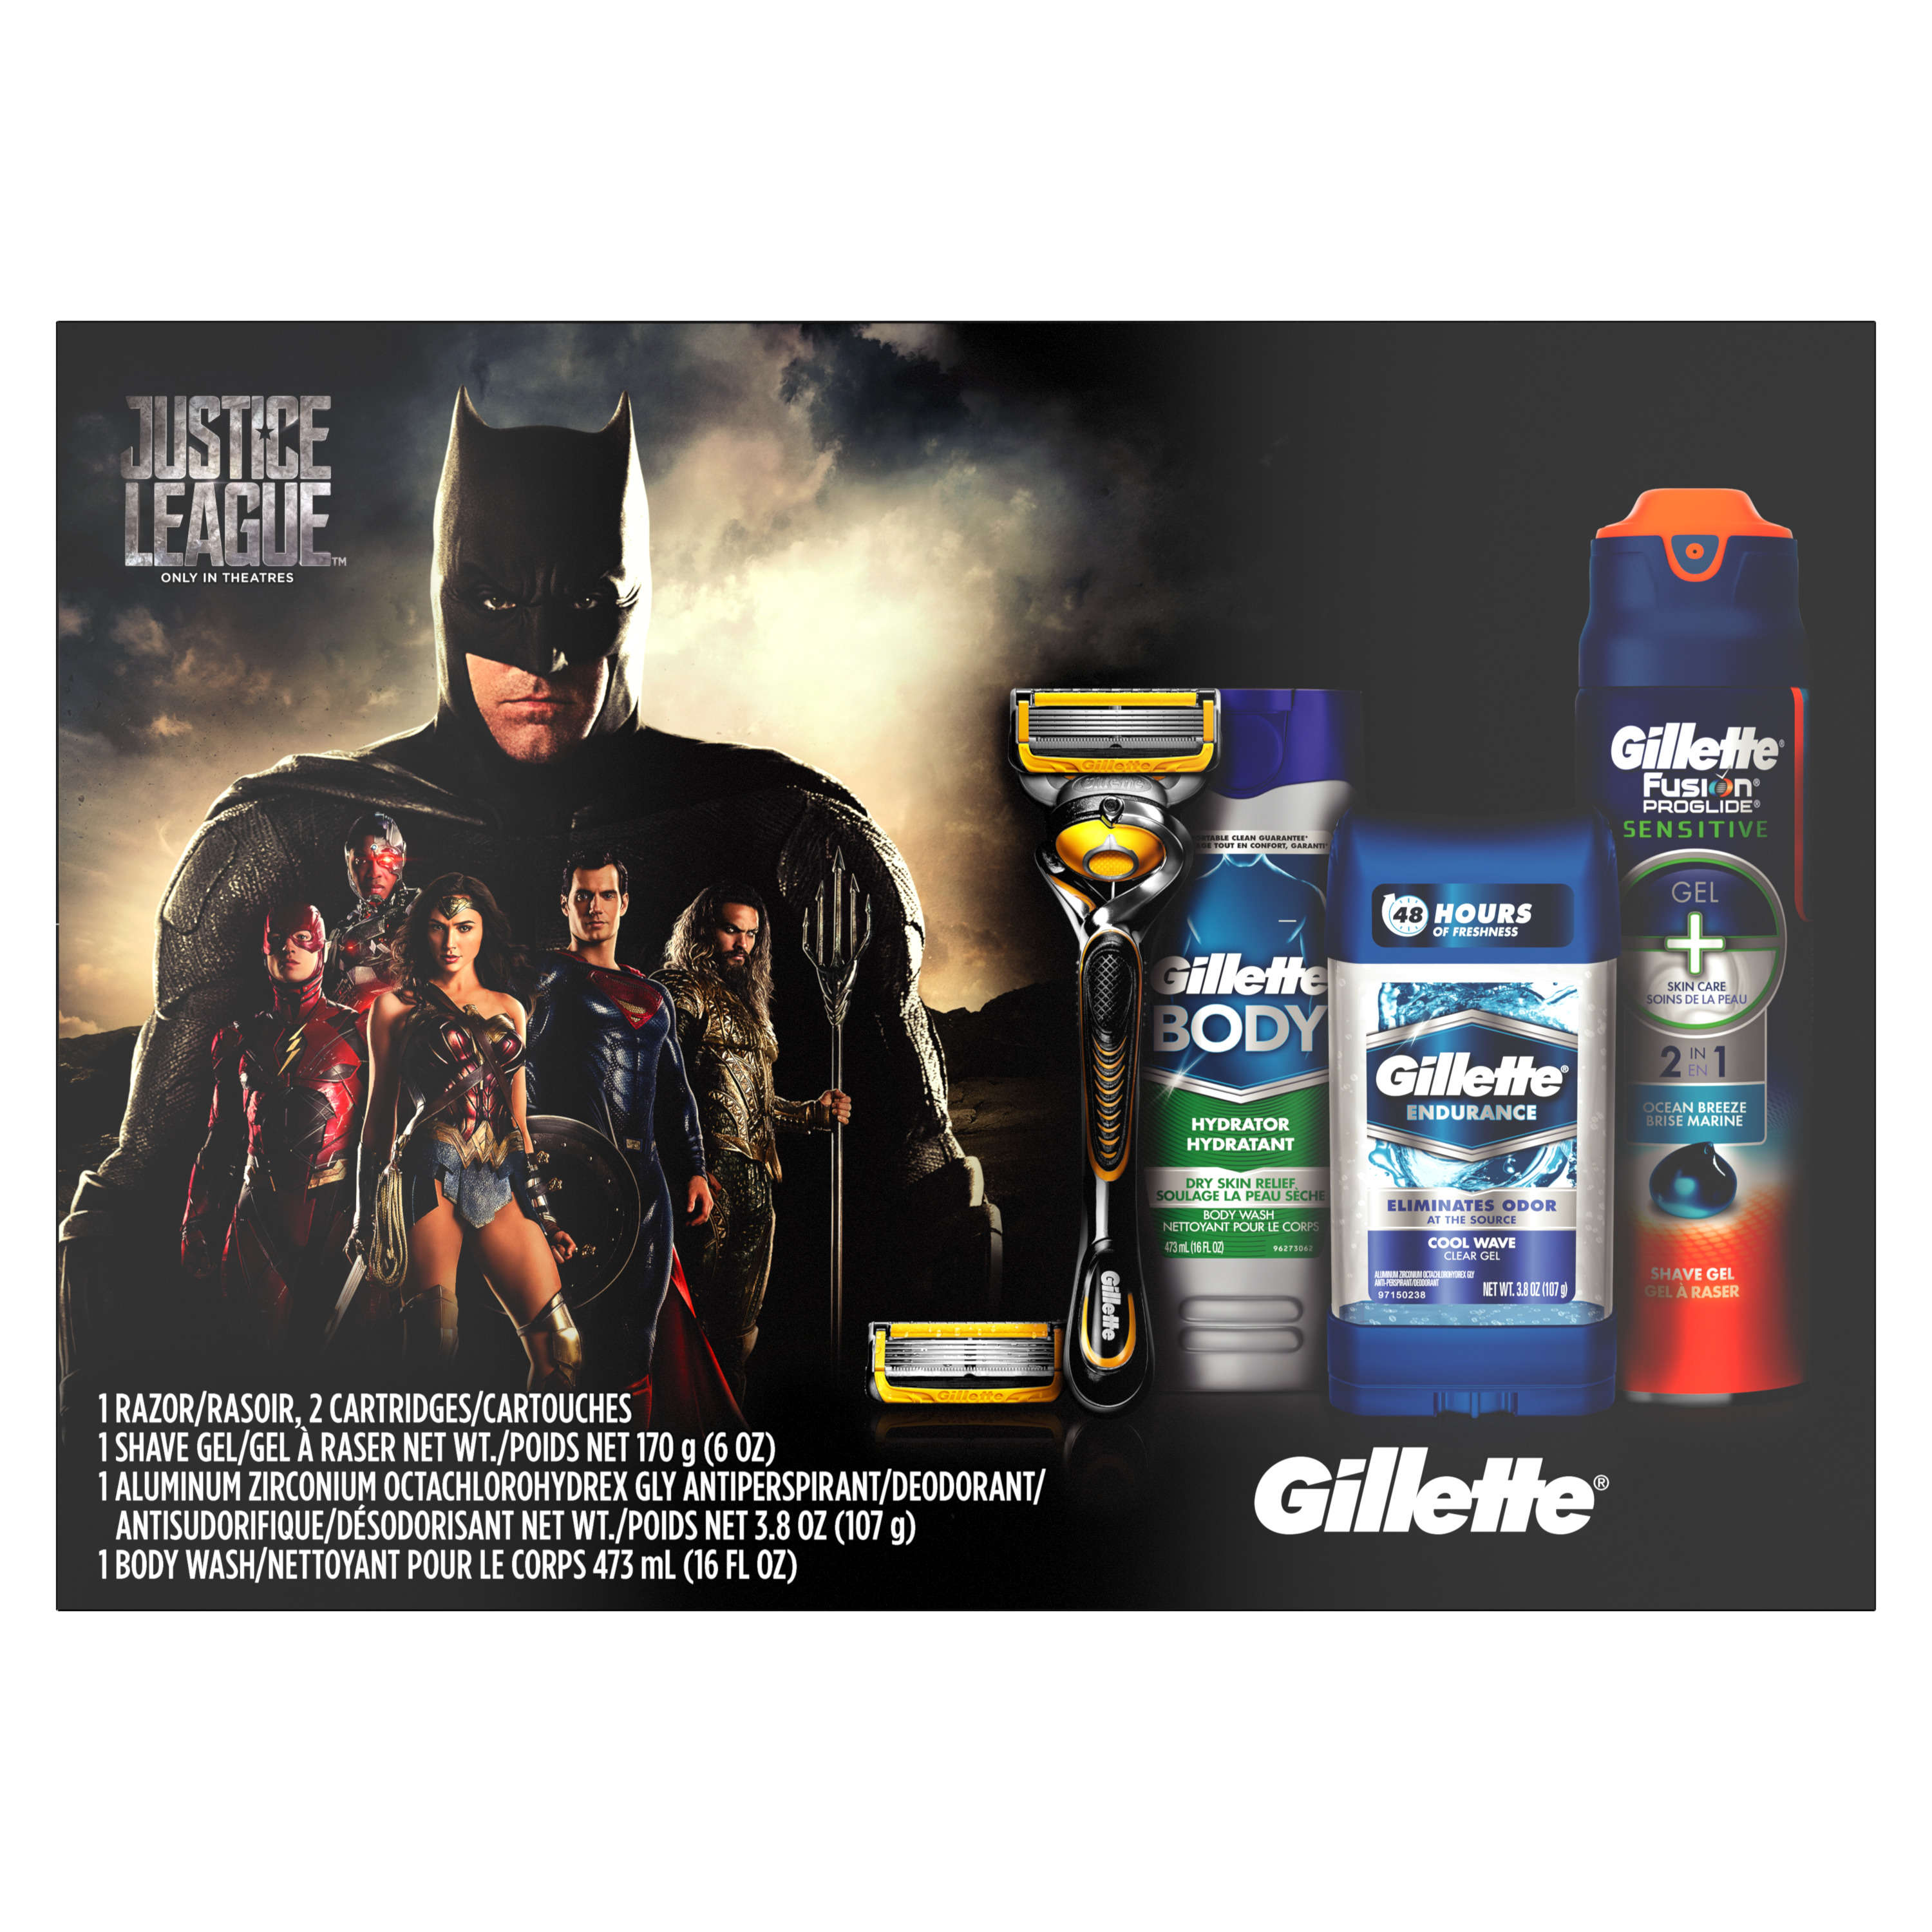 Gillette Gift Set With Fusion5 Proshield Razor + 2 Cartridges, Shave Gel, Cool Wave Antiperspirant and Deodorant, Body Wash - 6 Pc - image 1 of 9